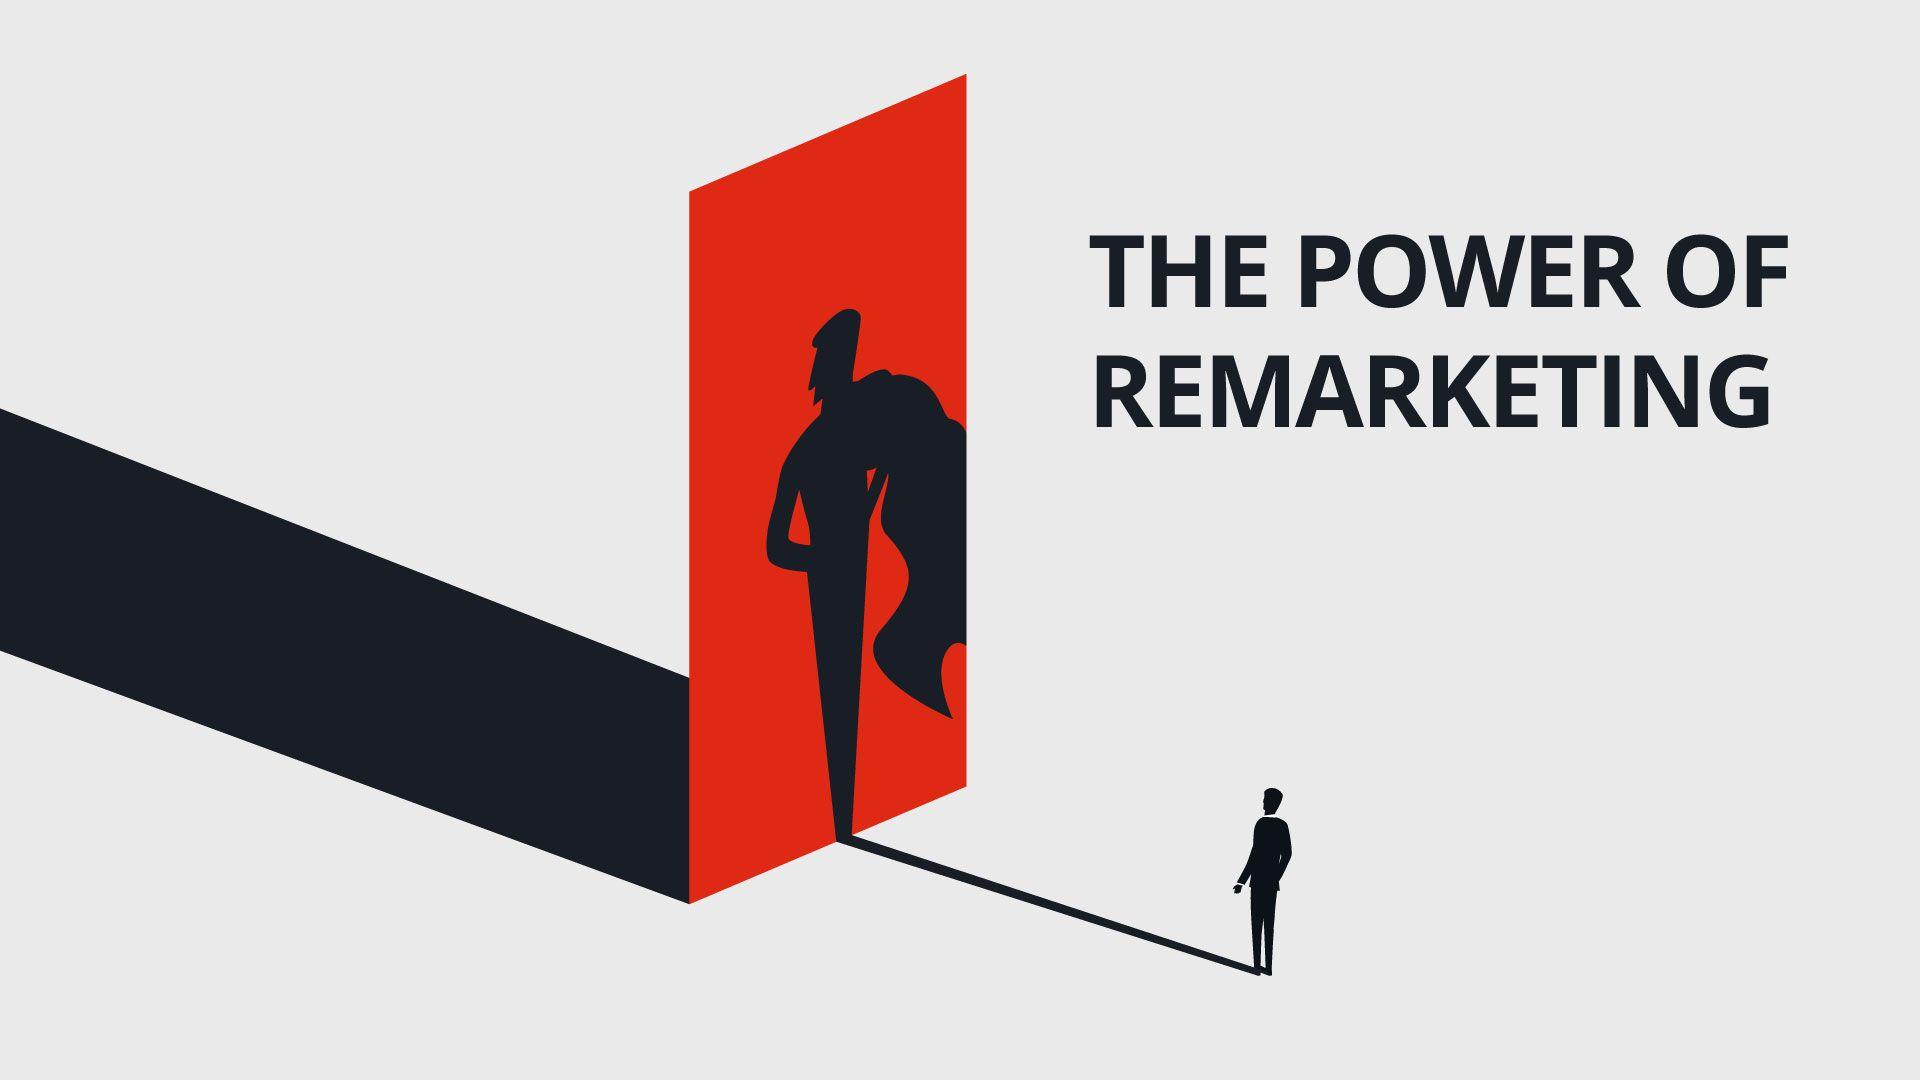 The power of remarketing blog post cover image